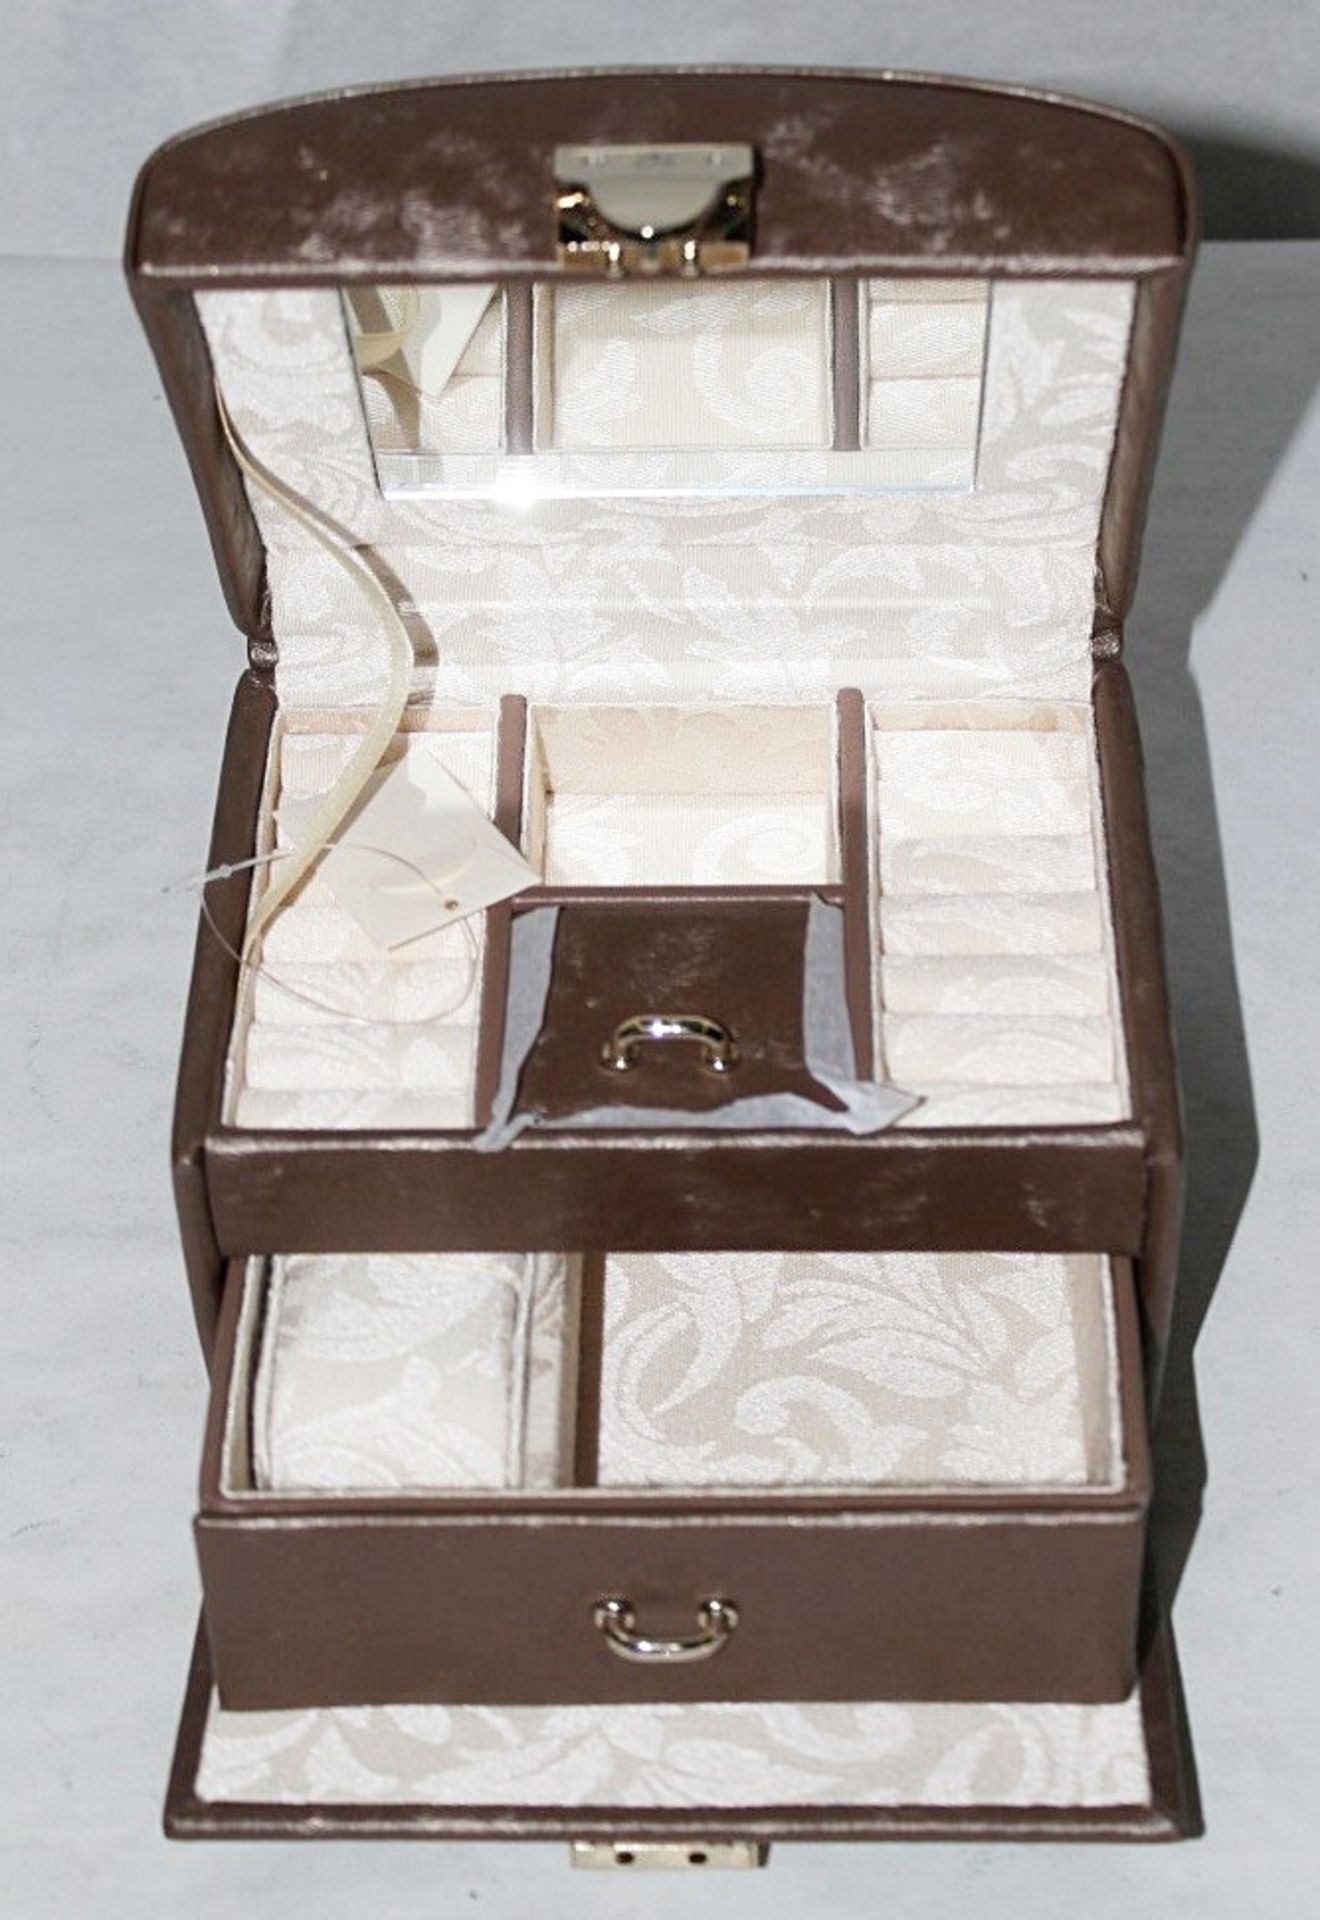 1 x "AB Collezioni" Italian Luxury Jewellery Case (33548) - Ref LT158 – Features Top & Pull-Out